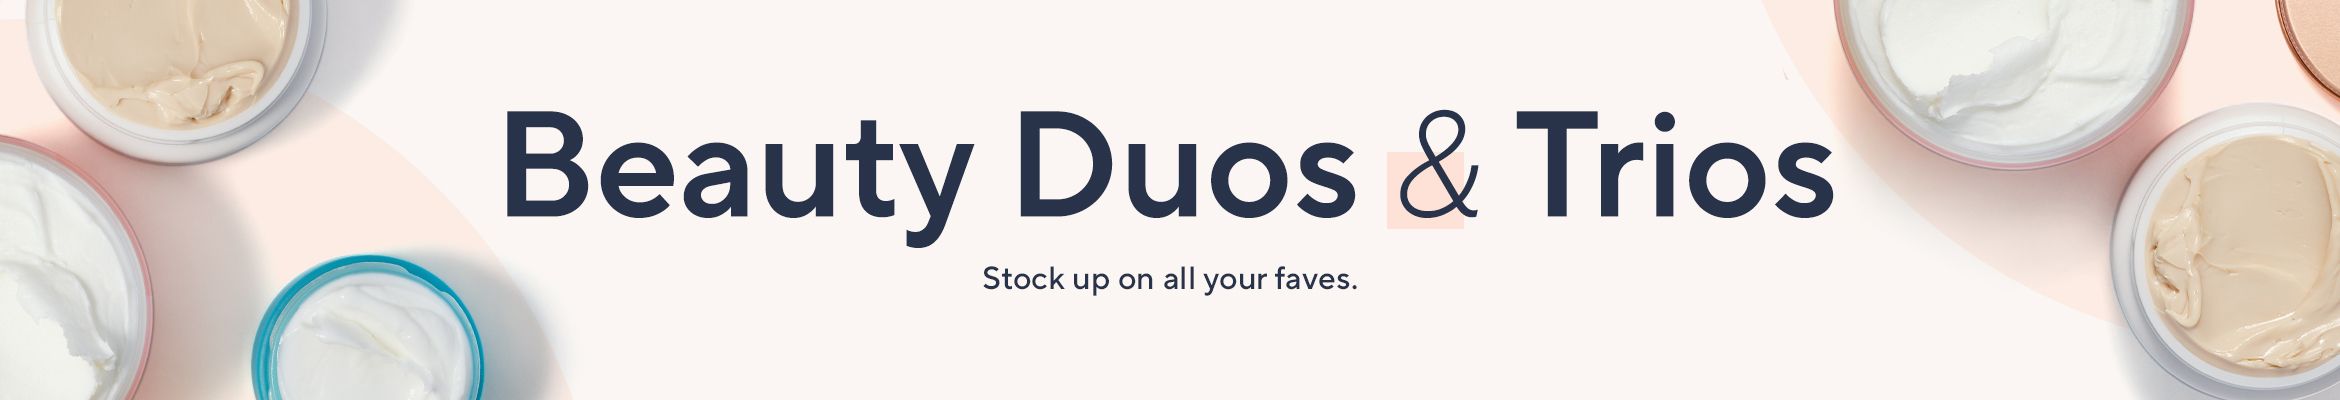 Beauty Duos & Trios Stock up on all your faves.